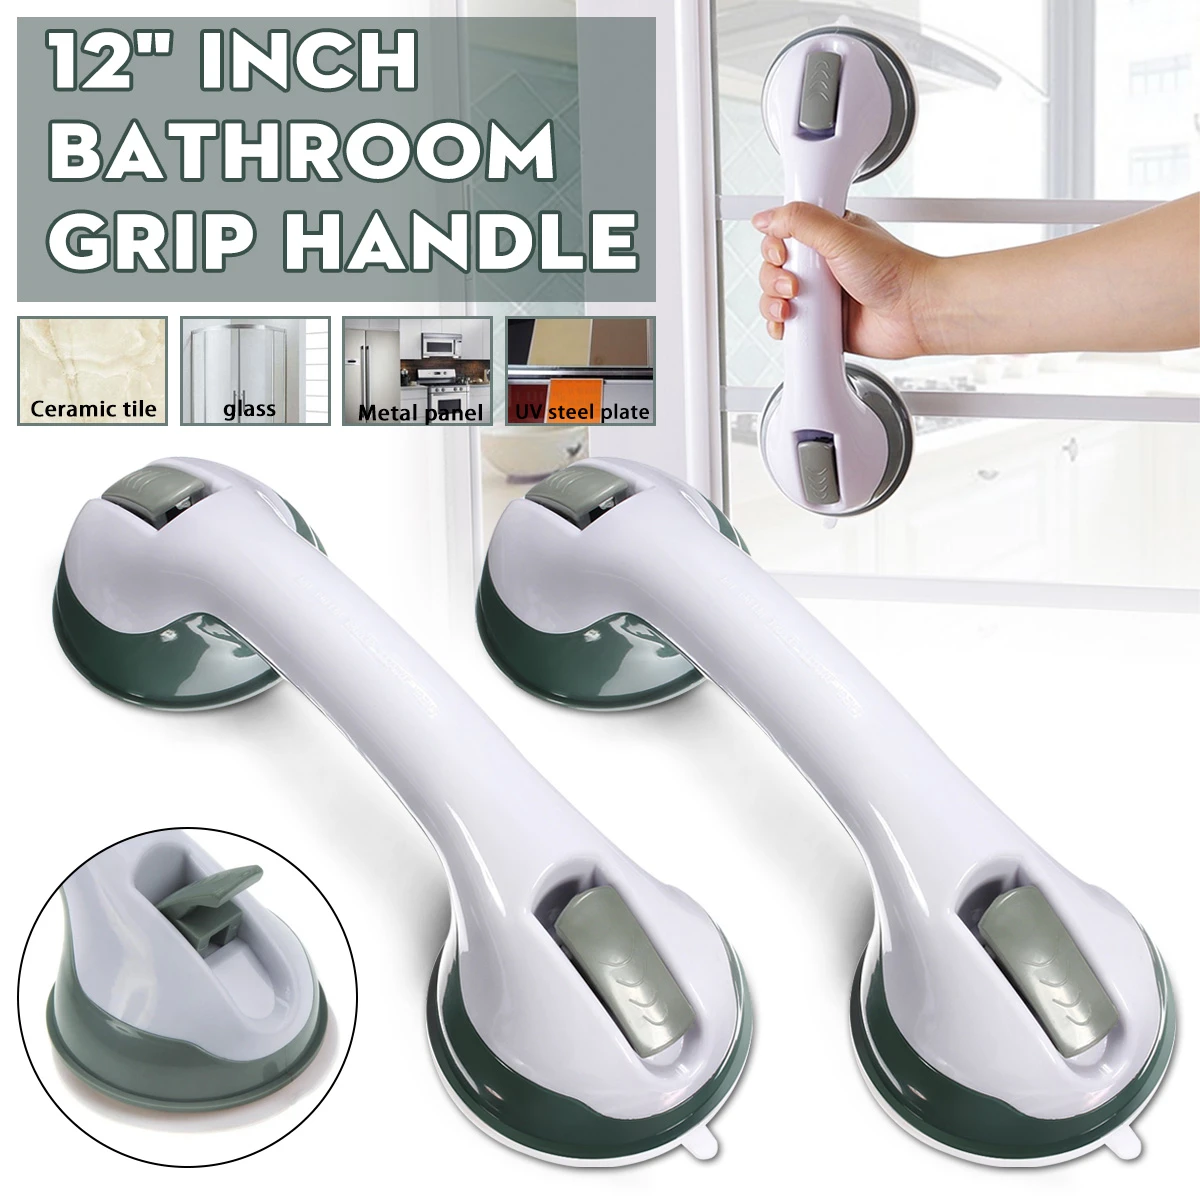 2PCS Bathroom Suction Cup Handle Grab Bar Toilet Bath Shower Tub Bathroom Shower Grab Handle Rail Grip for Elderly Safety